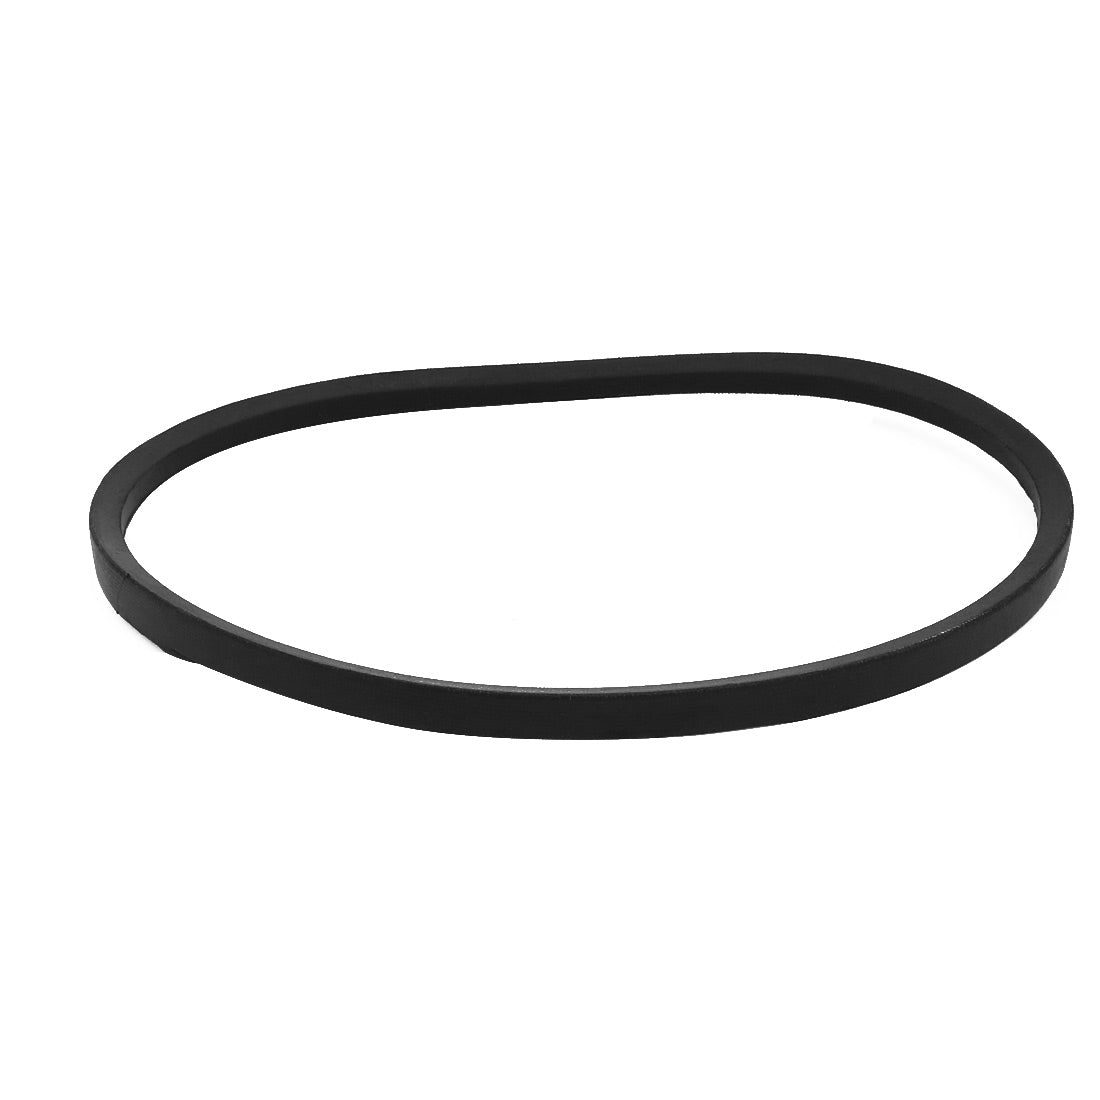 uxcell Uxcell A-700 700mm Inner Girth Transmission Drive Belt Washing Machine Replacement